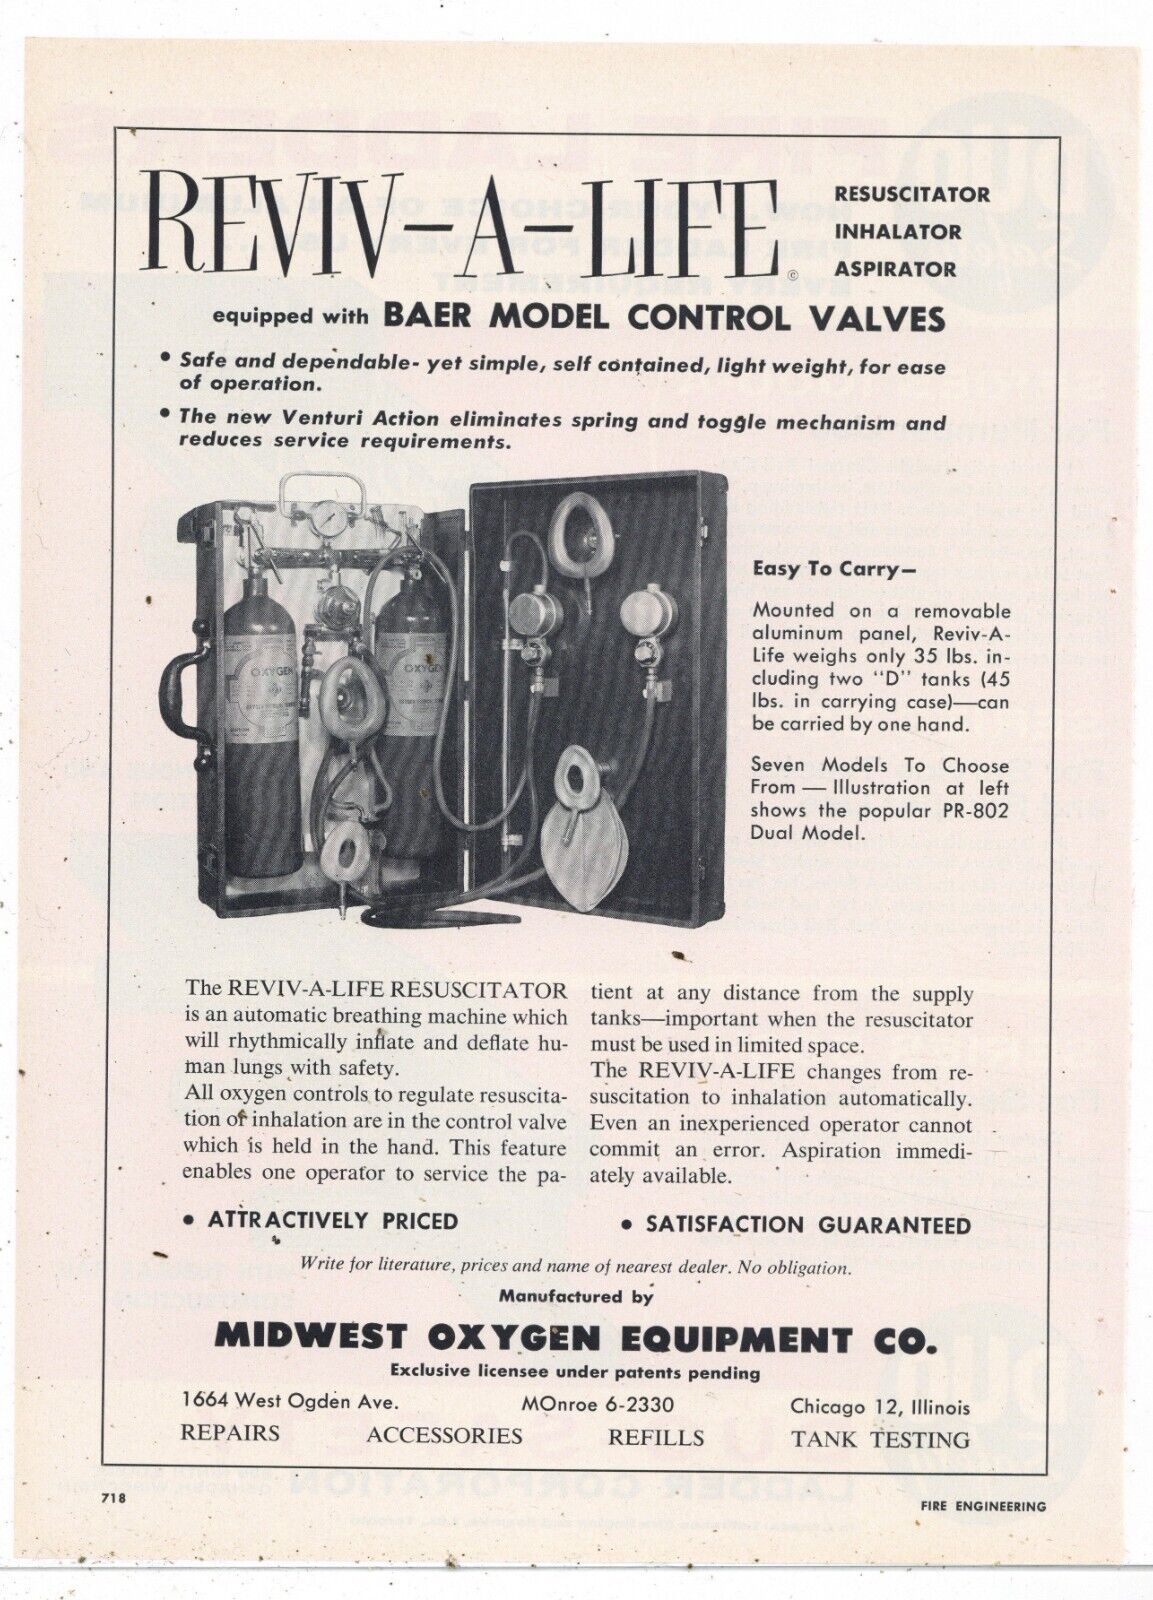 1957 Midwest Oxygen Equipment Ad; Reviv-A-Live Resuscitator for Fire Rescue